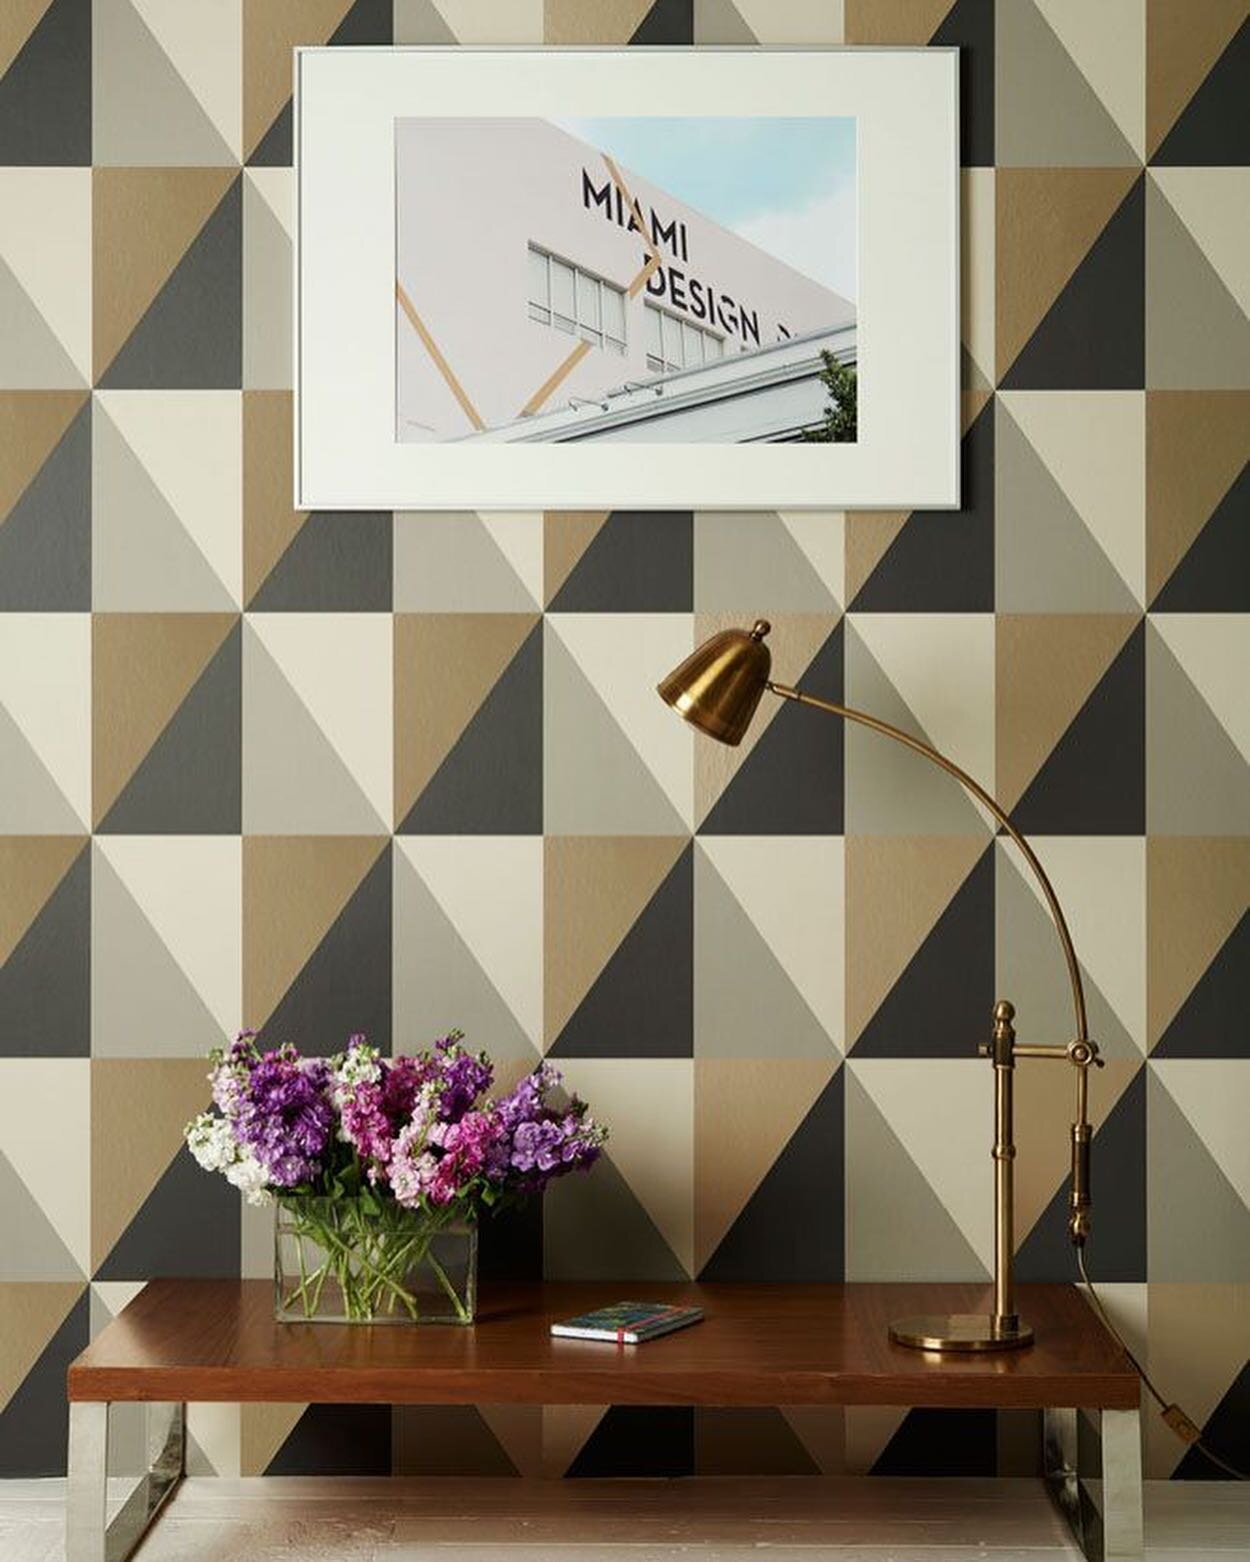 Geometric wallpapers to create minimalistic and abstract design in your interior. #wallpaper #interiordesign #geometric #pattern #interiorstyling